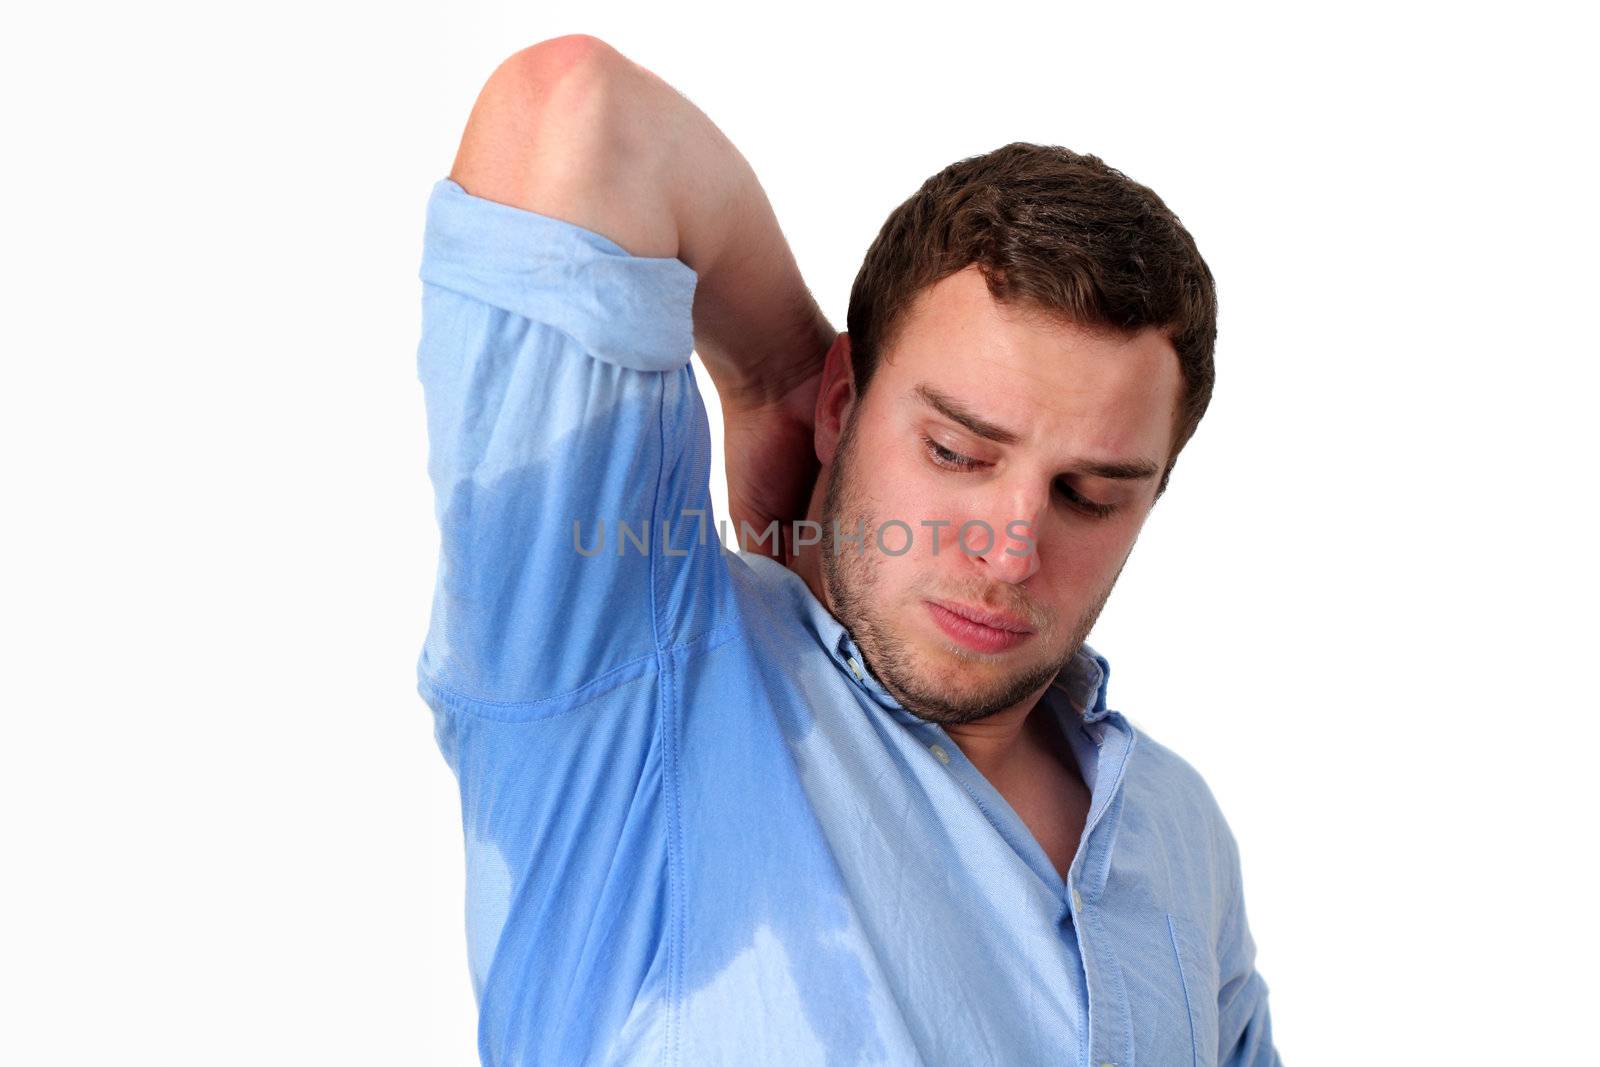 Man with Hyperhidrosis sweating very badly under armpit